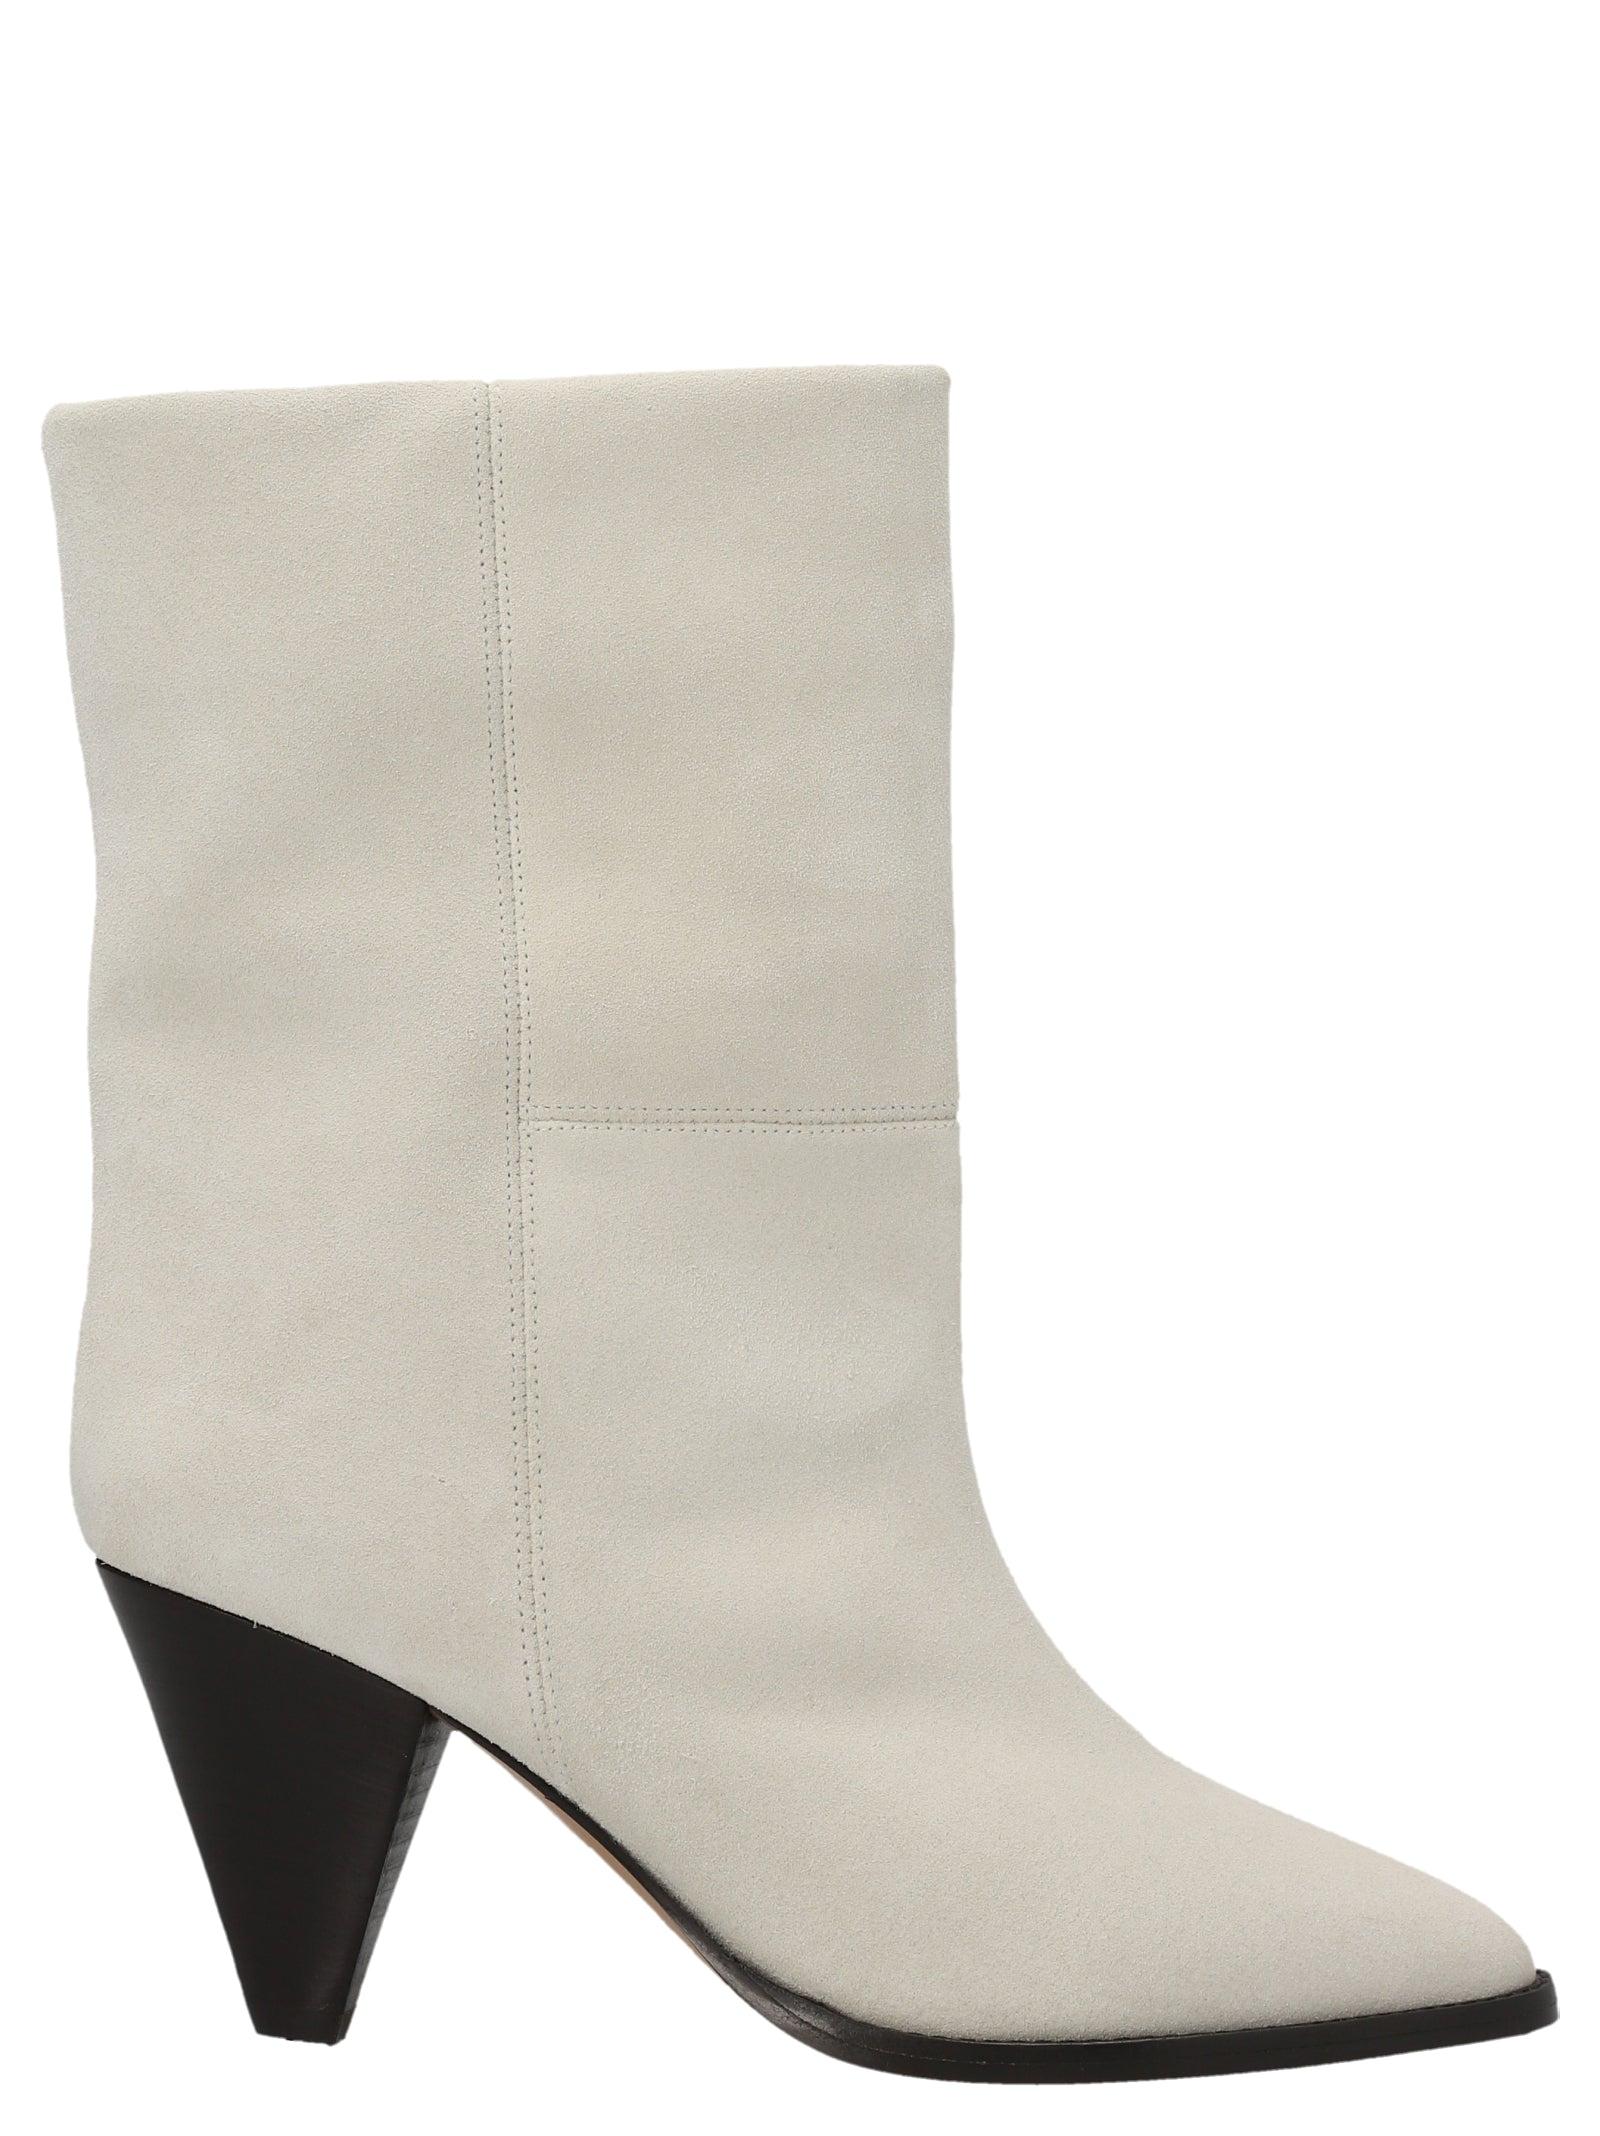 Isabel Marant Rouxa Ankle Boots in White | Lyst